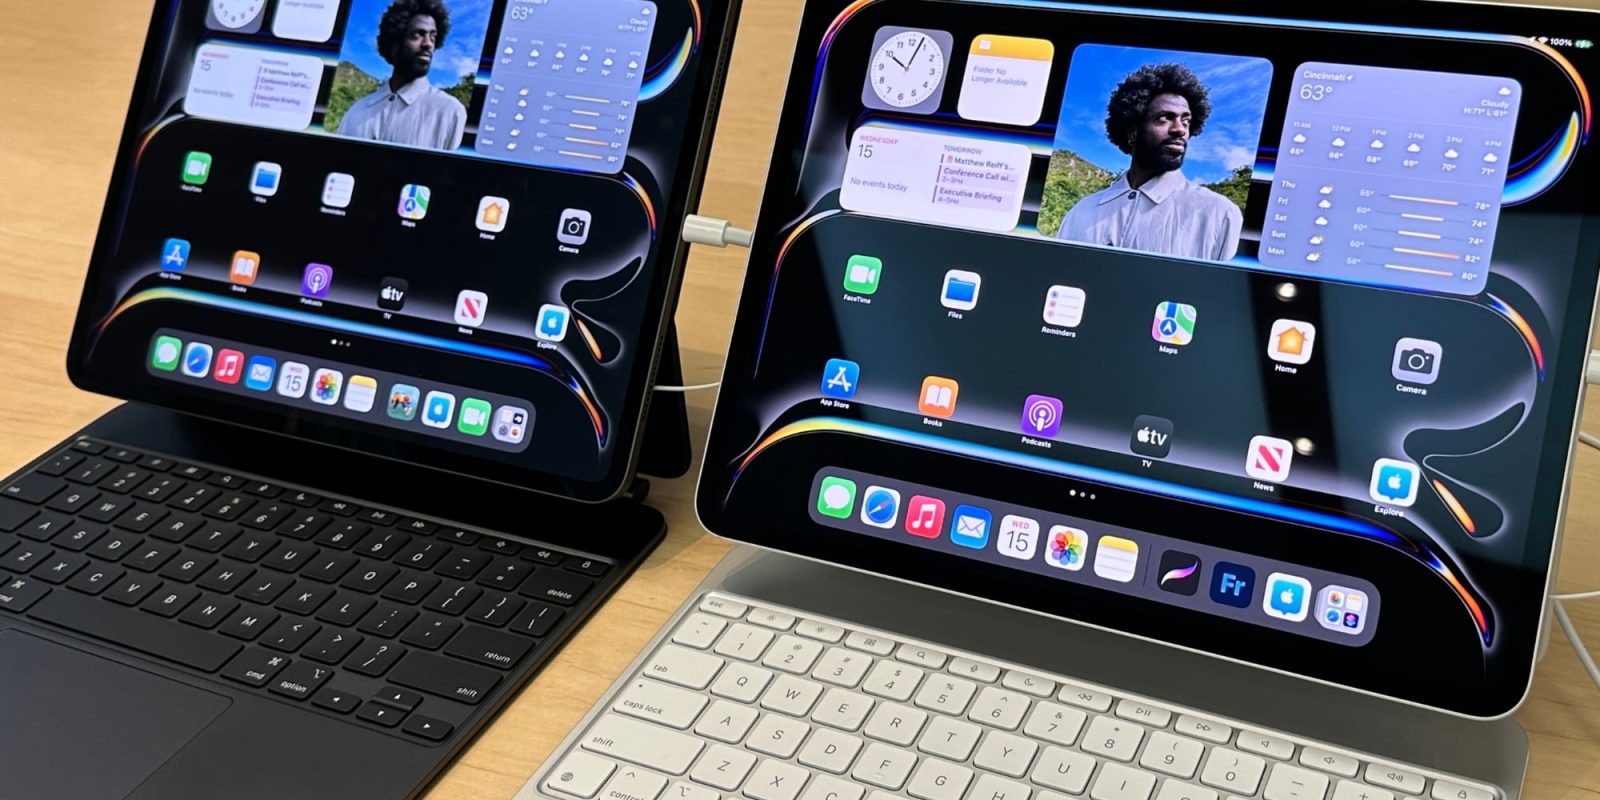 Apple says the majority of Mac users also own an iPad, which likely means macOS is never coming to the iPad